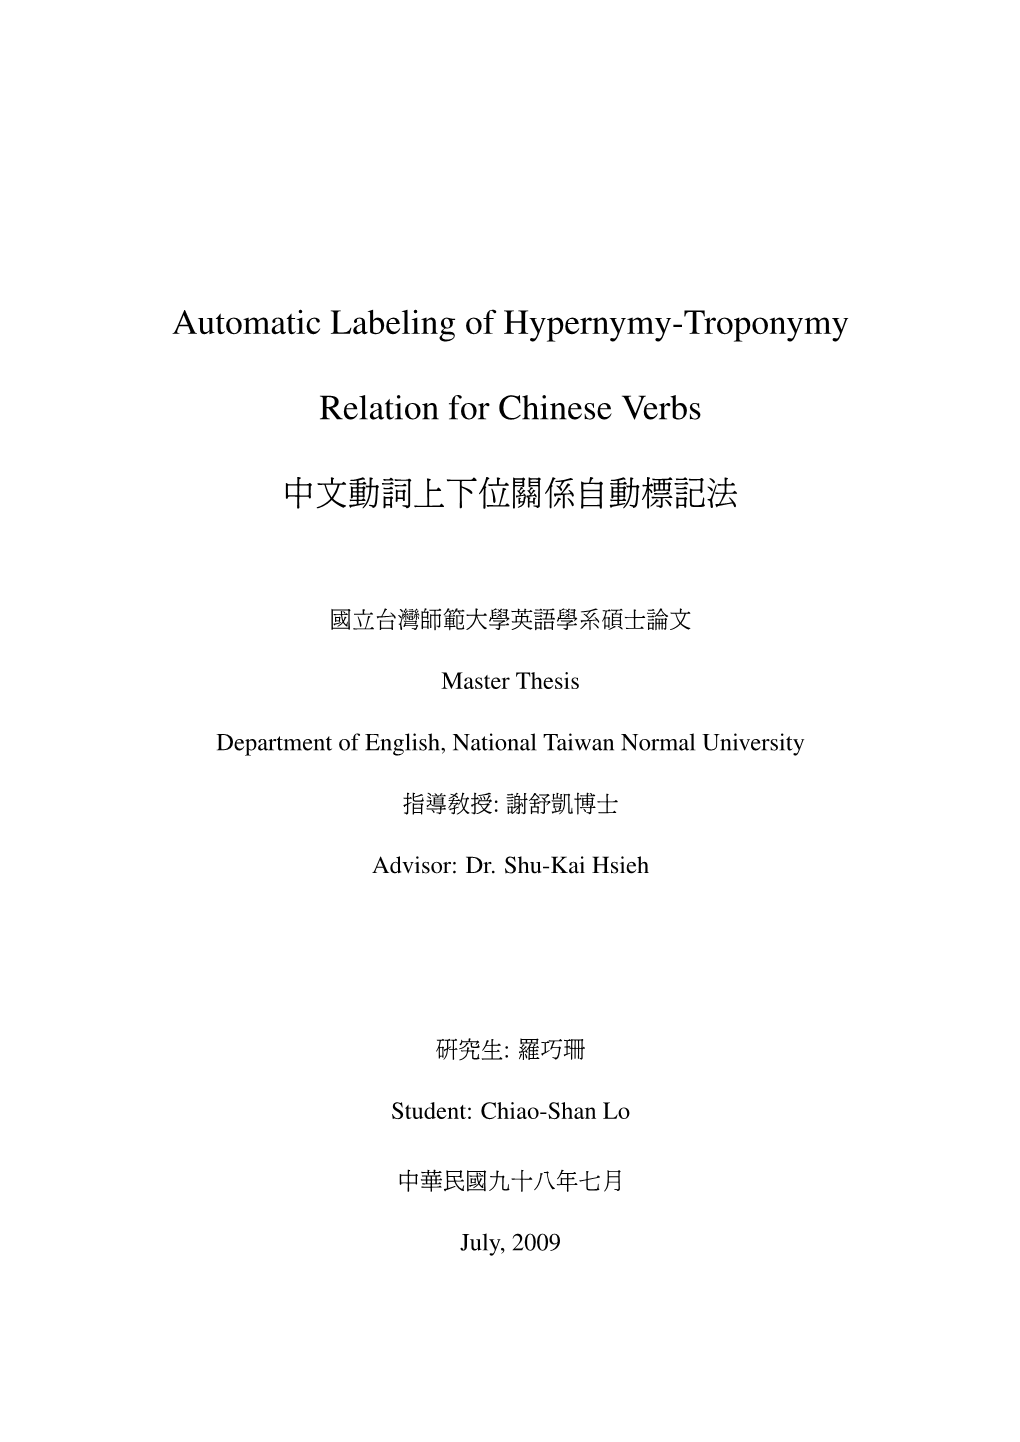 Automatic Labeling of Hypernymy-Troponymy Relation For